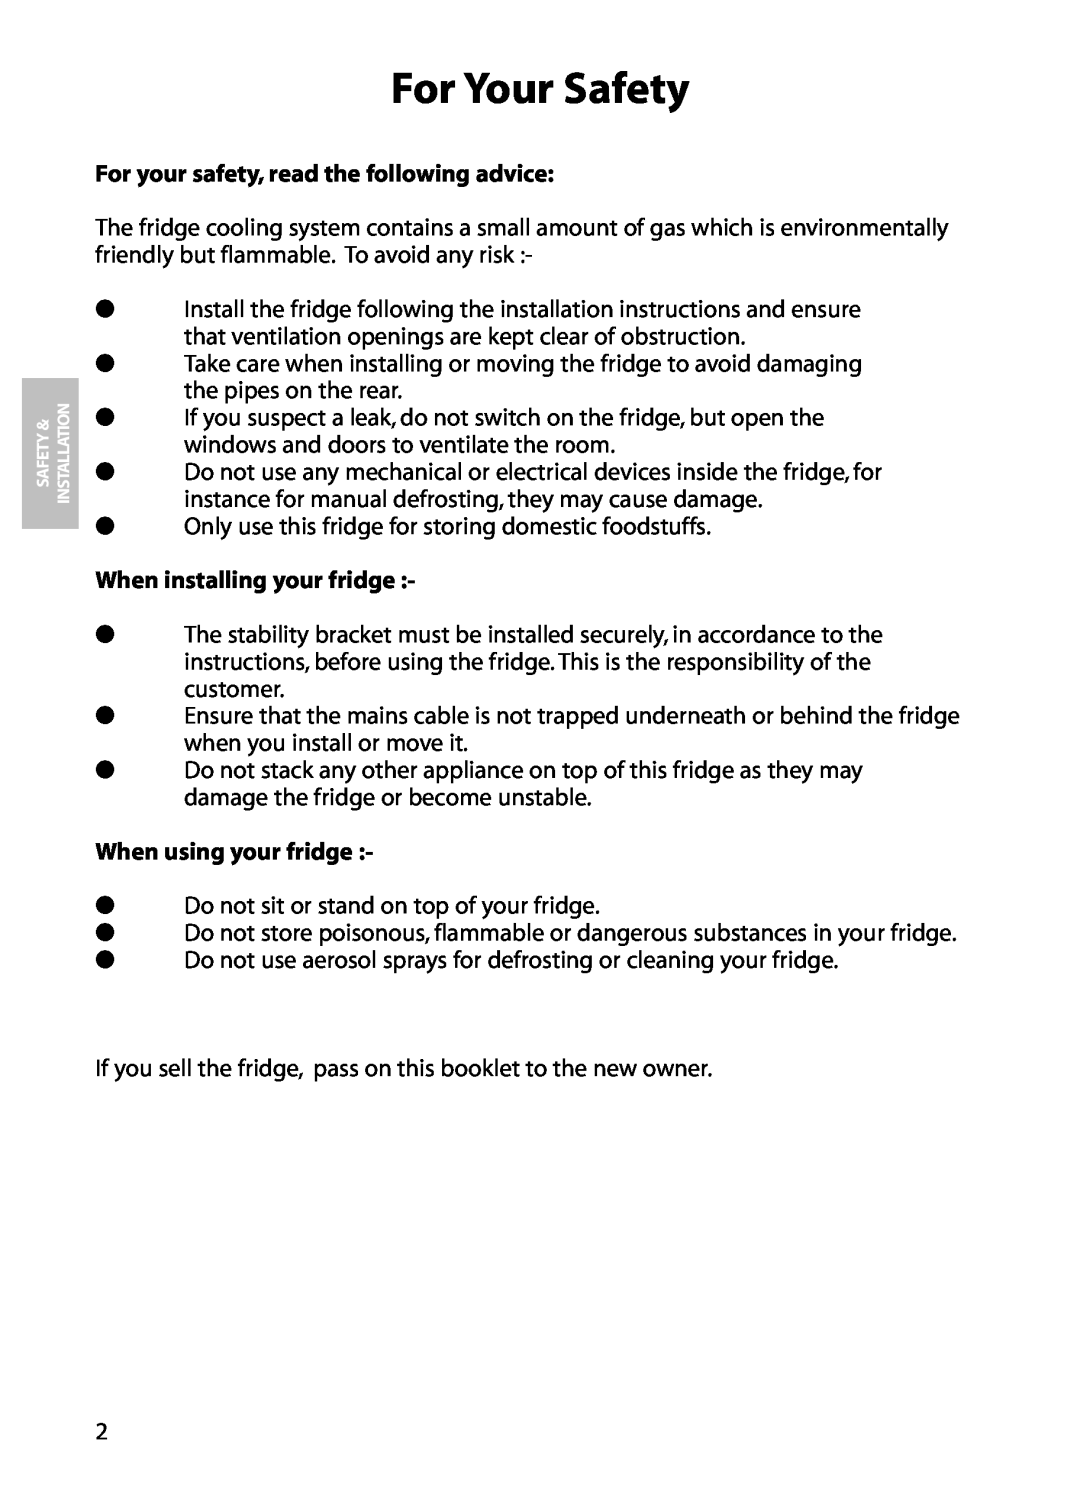 Hotpoint RLA81, RLM81 manual For Your Safety, For your safety, read the following advice, When installing your fridge 